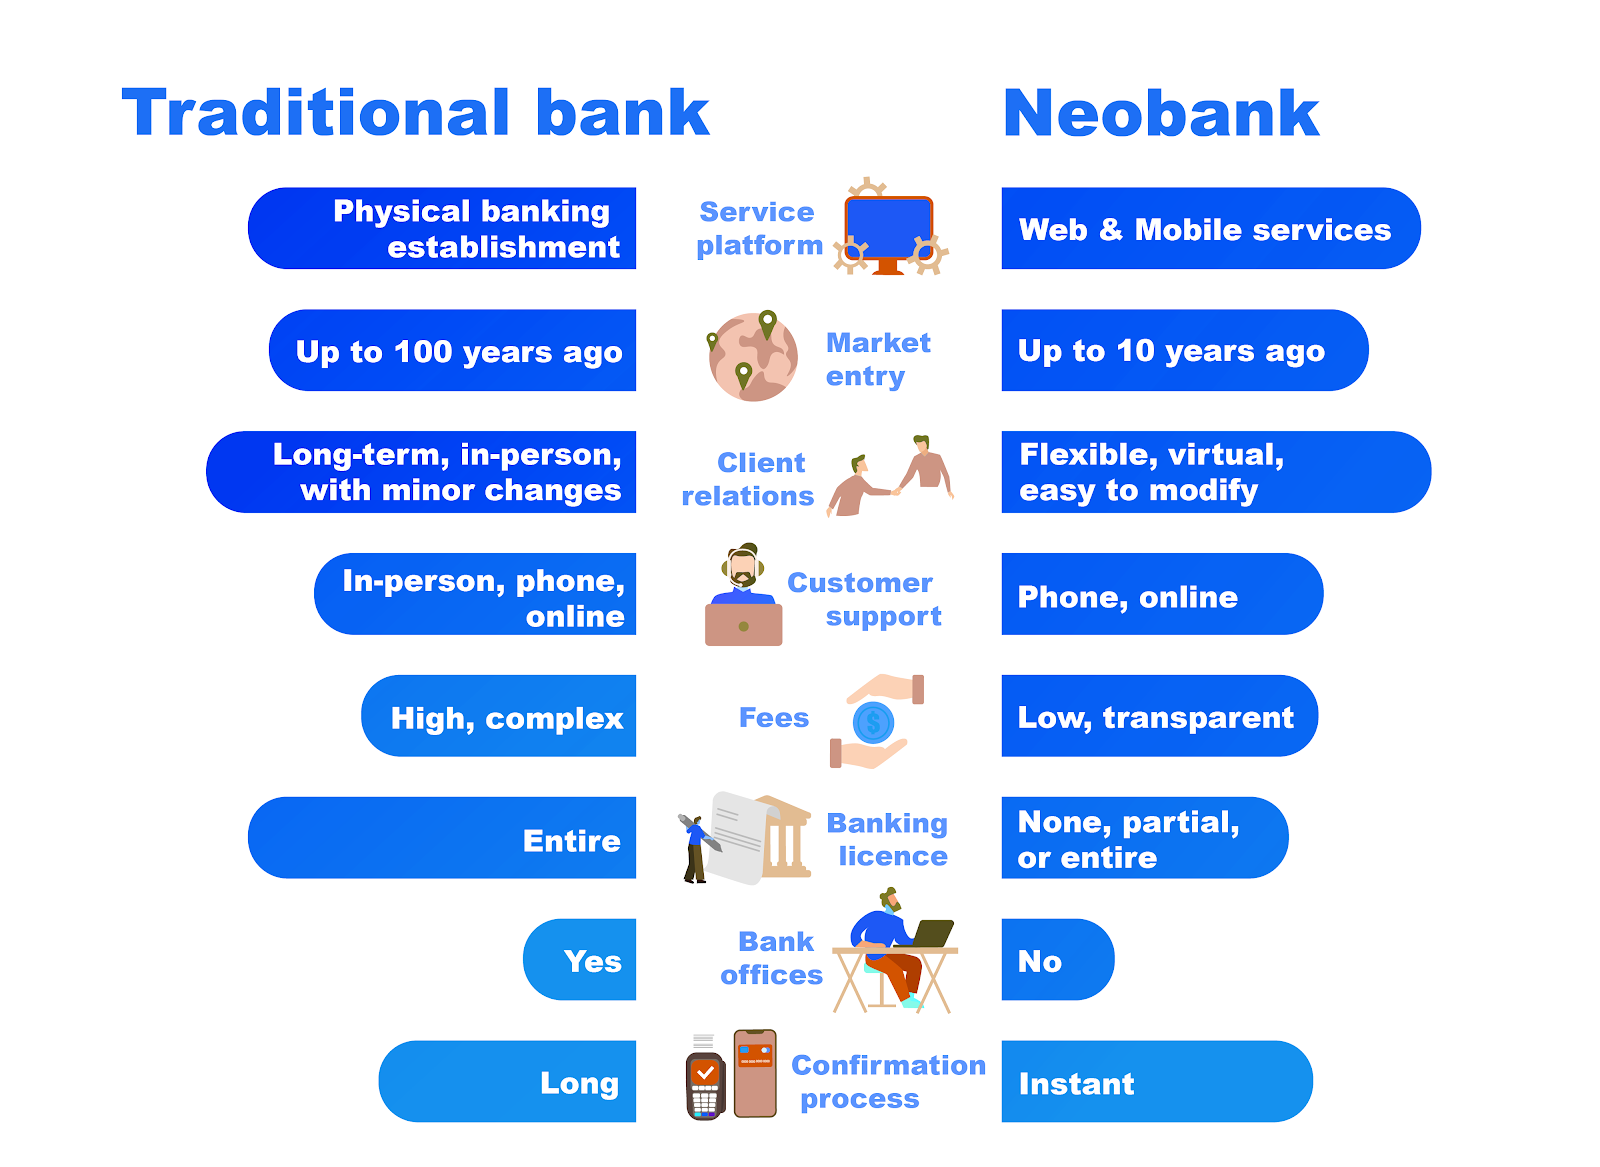 What the hell is a neobank?